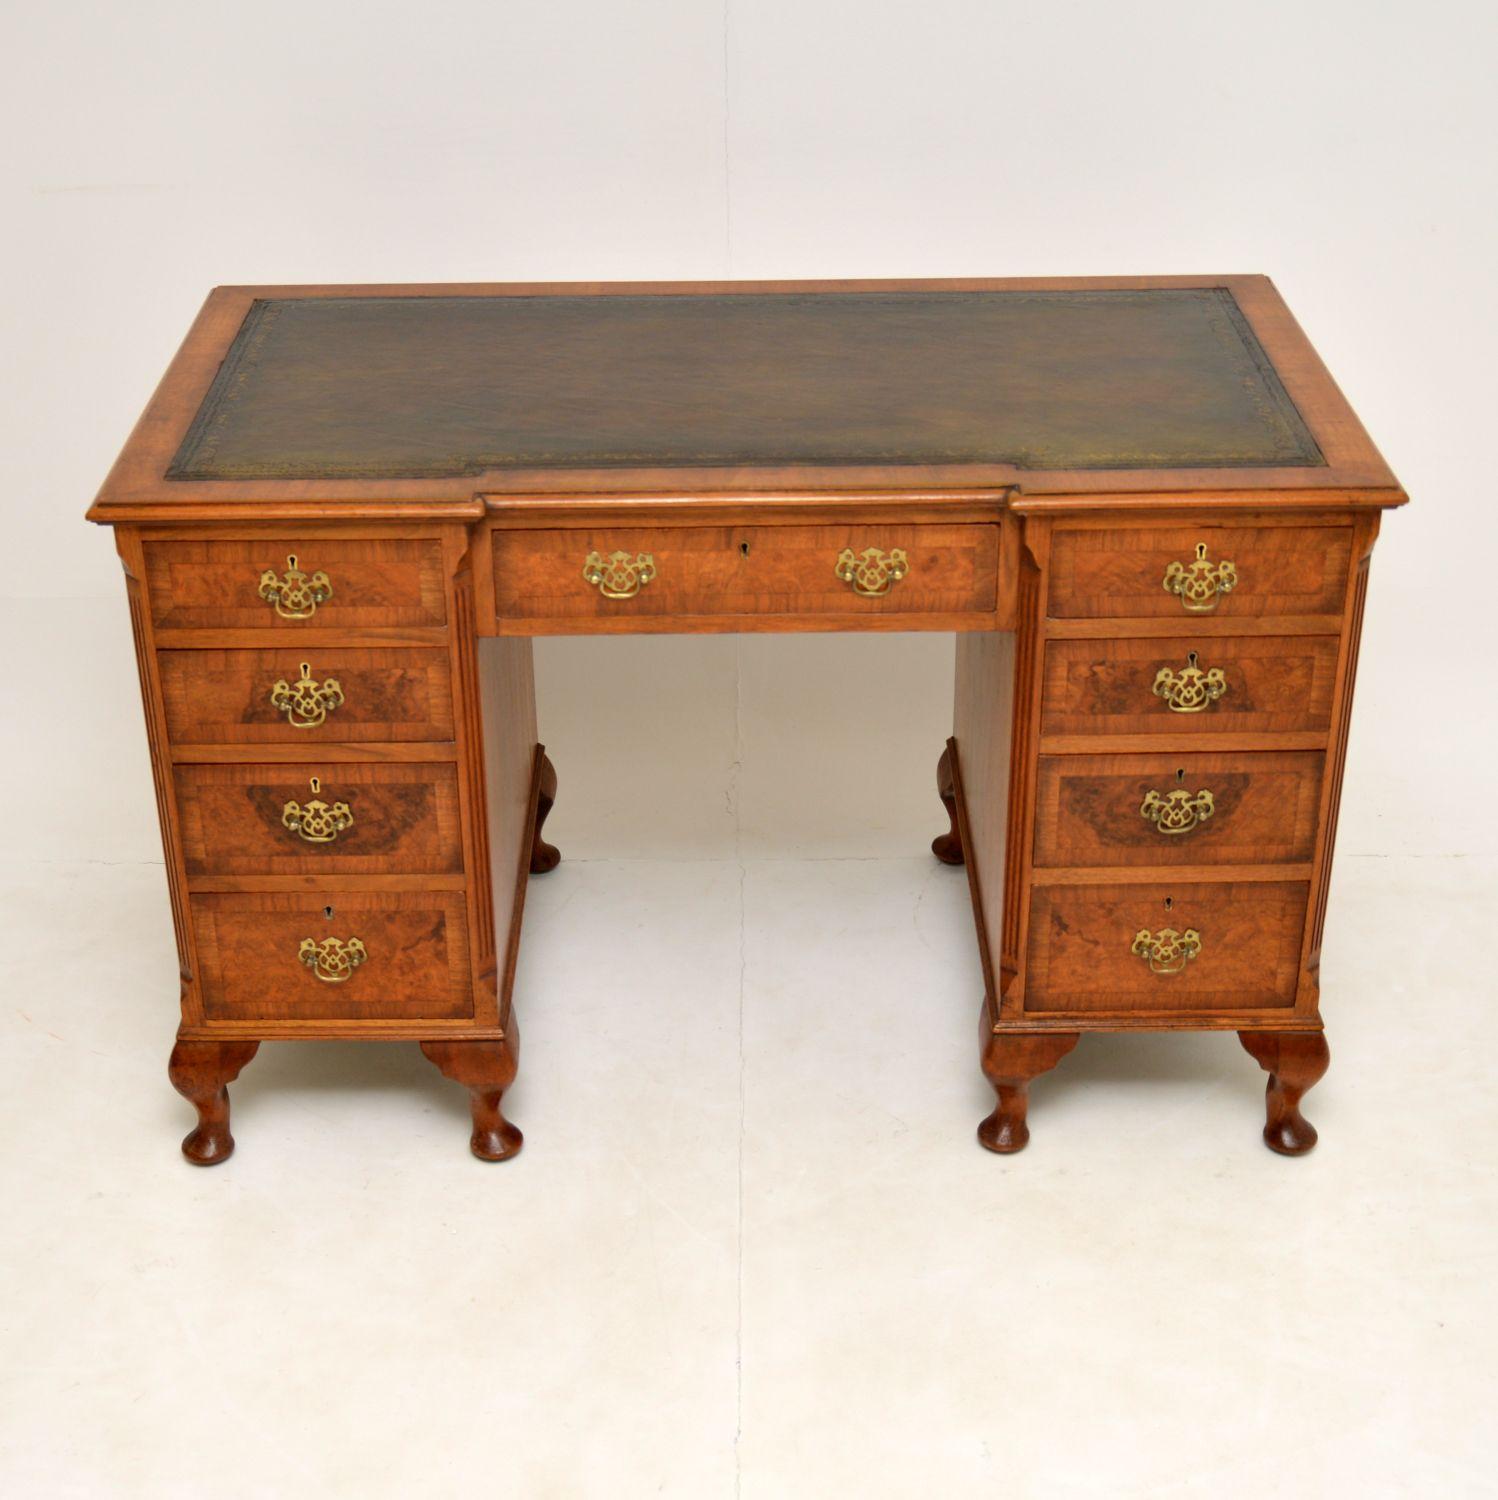 A stunning antique inverted breakfront pedestal desk in walnut, dating from around the 1910-1920’s period.

It is of excellent quality throughout, with a solid walnut construction and beautiful inlaid burr walnut veneers on the drawers fronts.